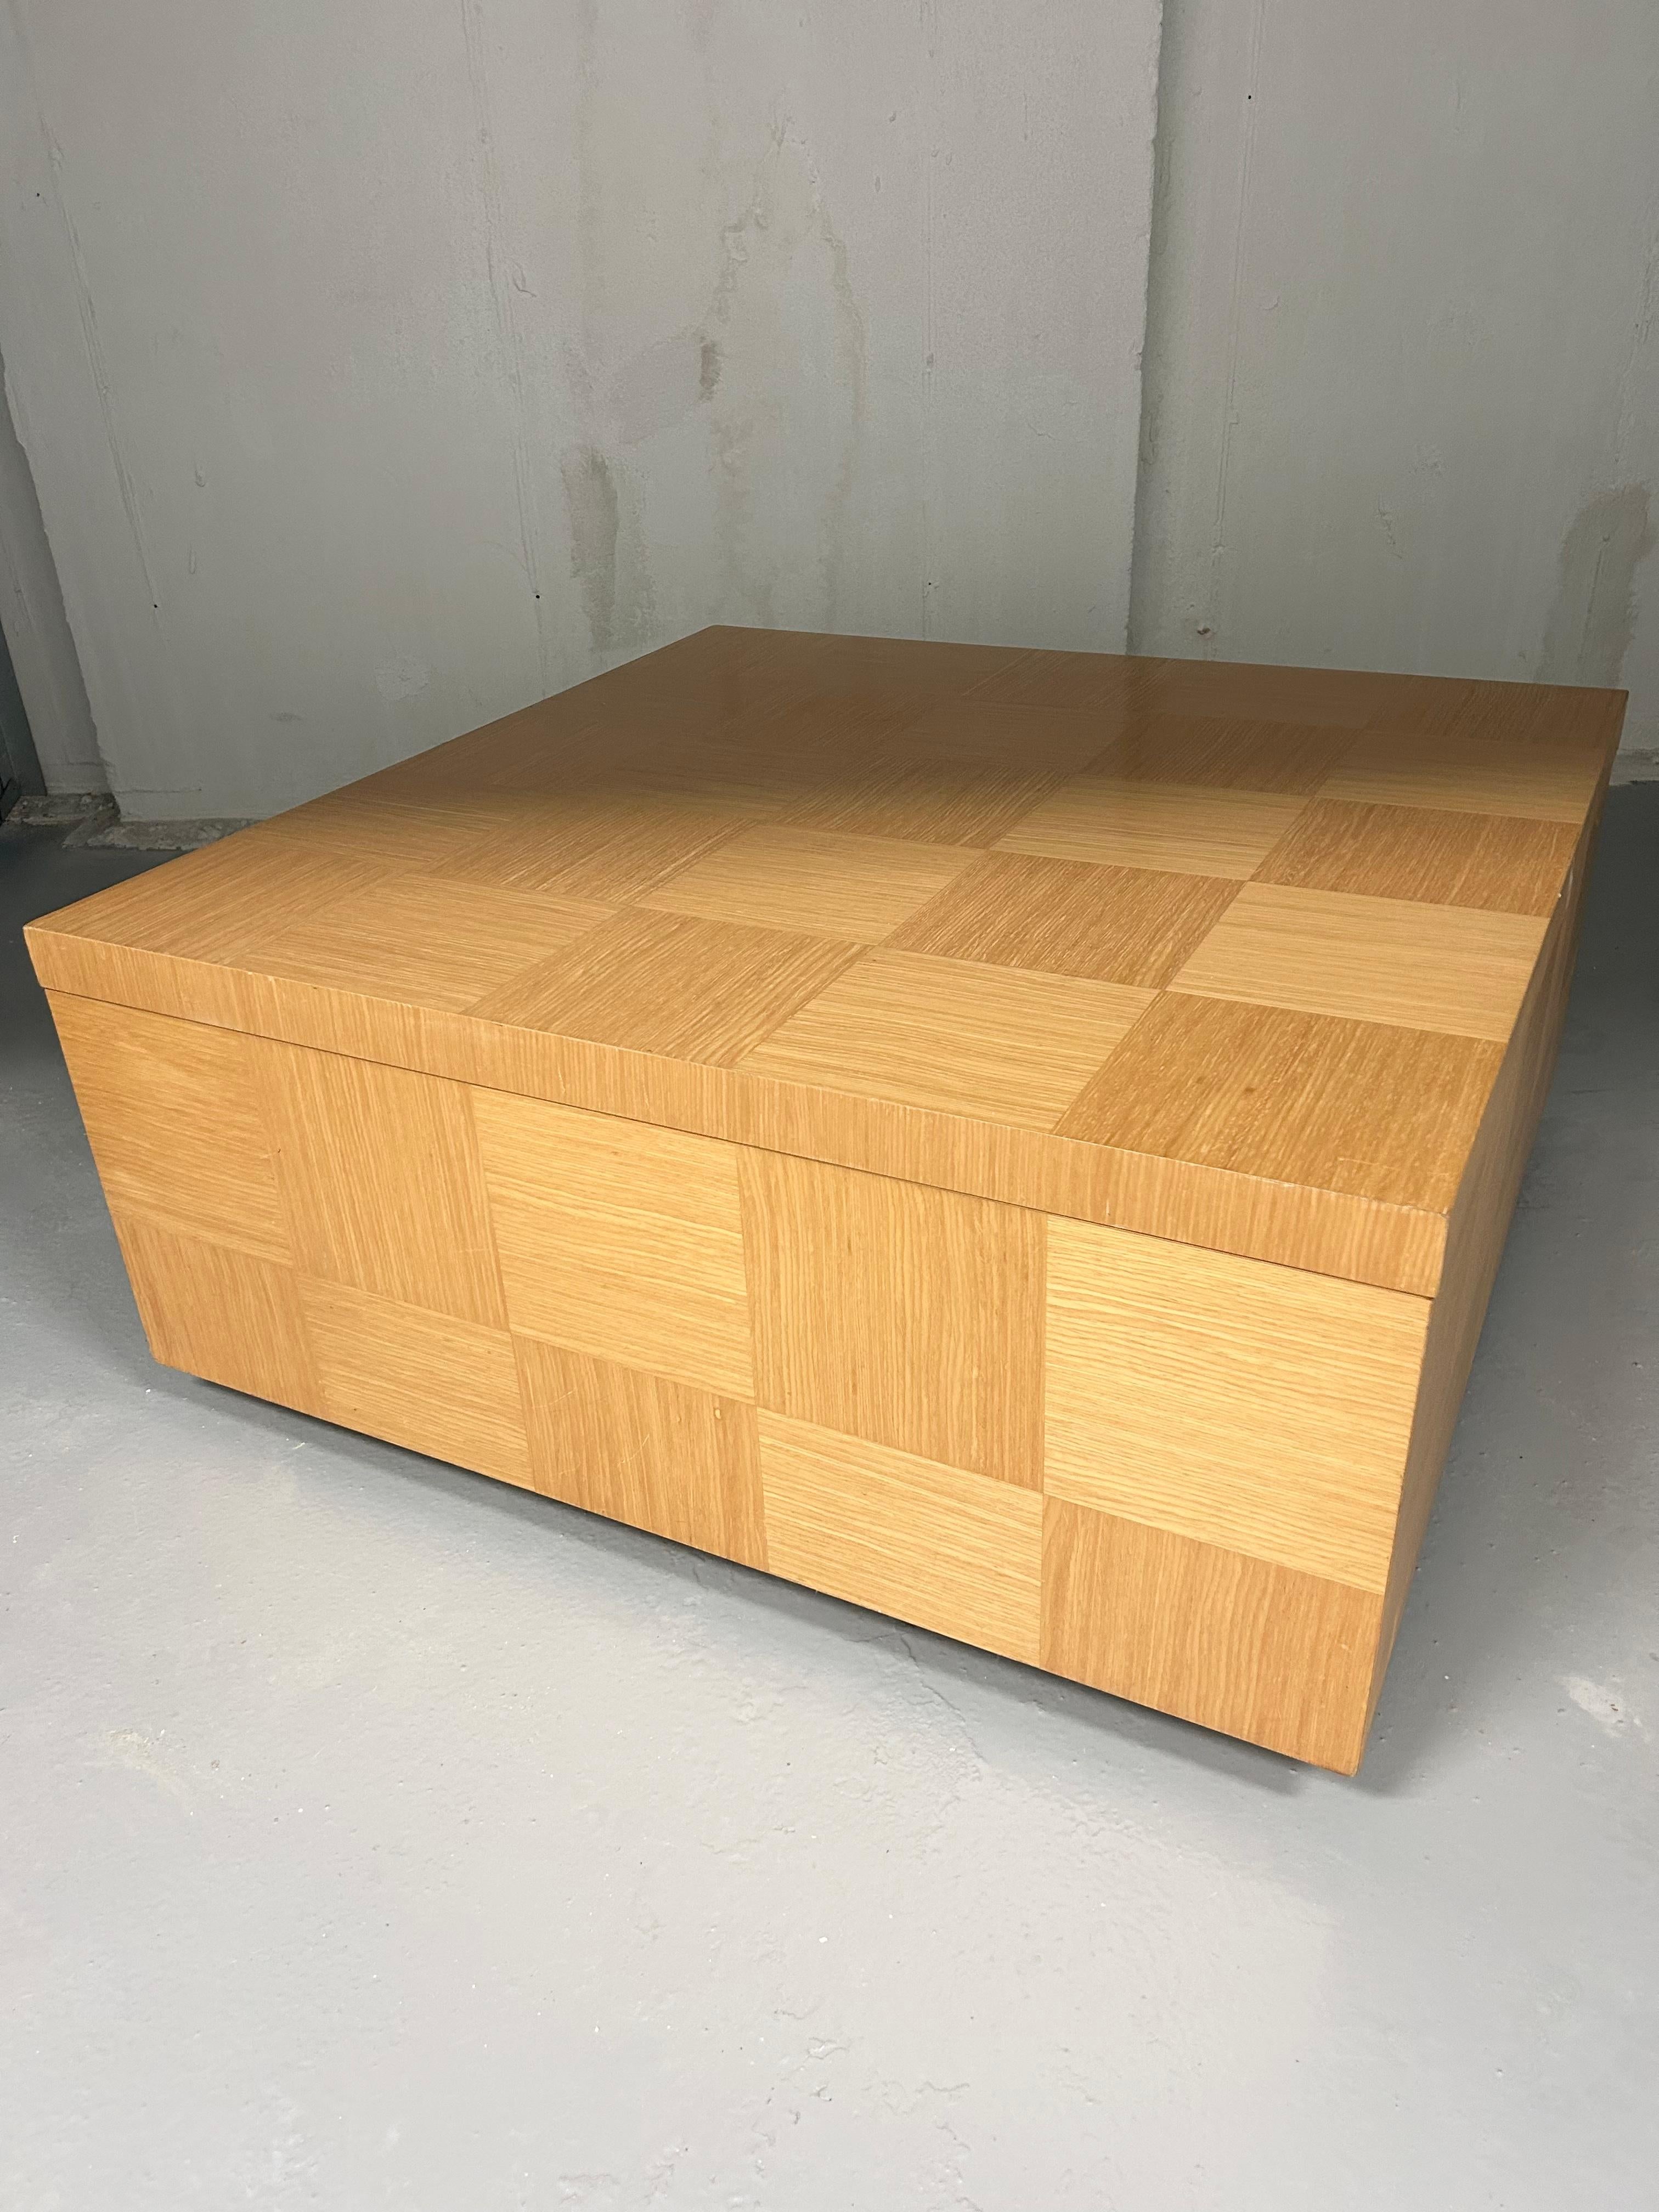 Vintage Dakota Jackson for lane checkered coffee table. Wood veneer grain placed in contrasting directions creates subtle checked pattern. Minimal wear - a few light scuffs pictured.